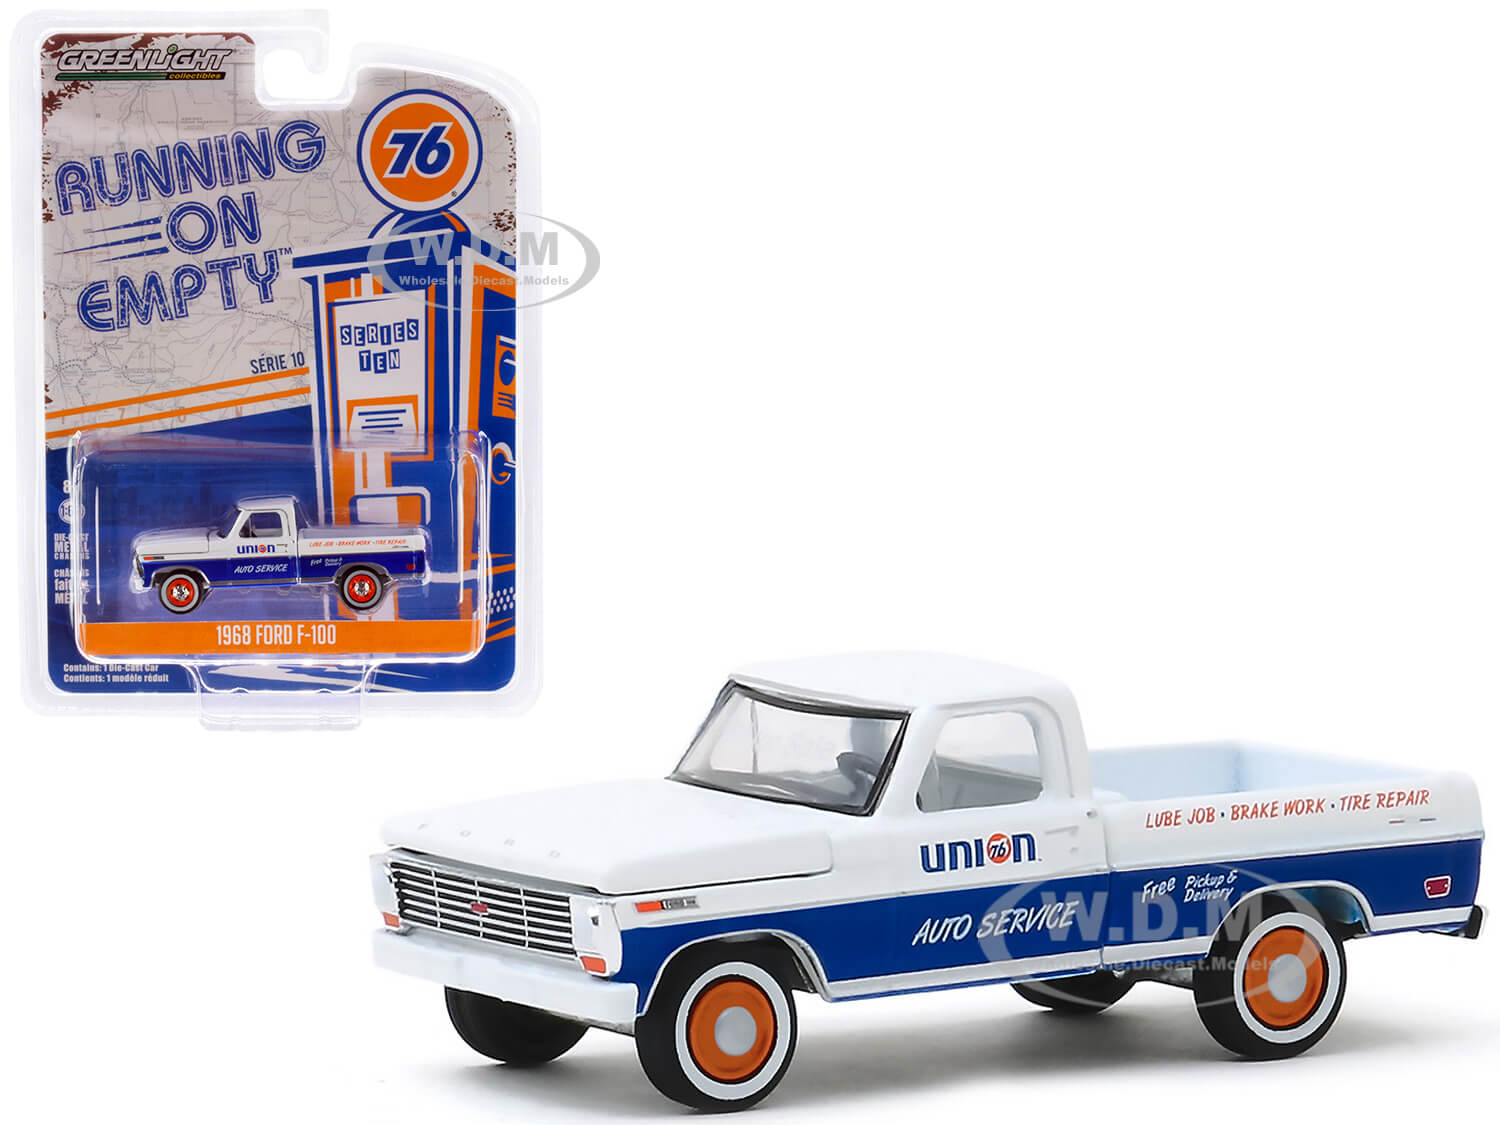 1968 Ford F-100 Pickup Truck "Union 76 Auto Service" White with Blue Stripe "Running on Empty" Series 10 1/64 Diecast Model Car by Greenlight